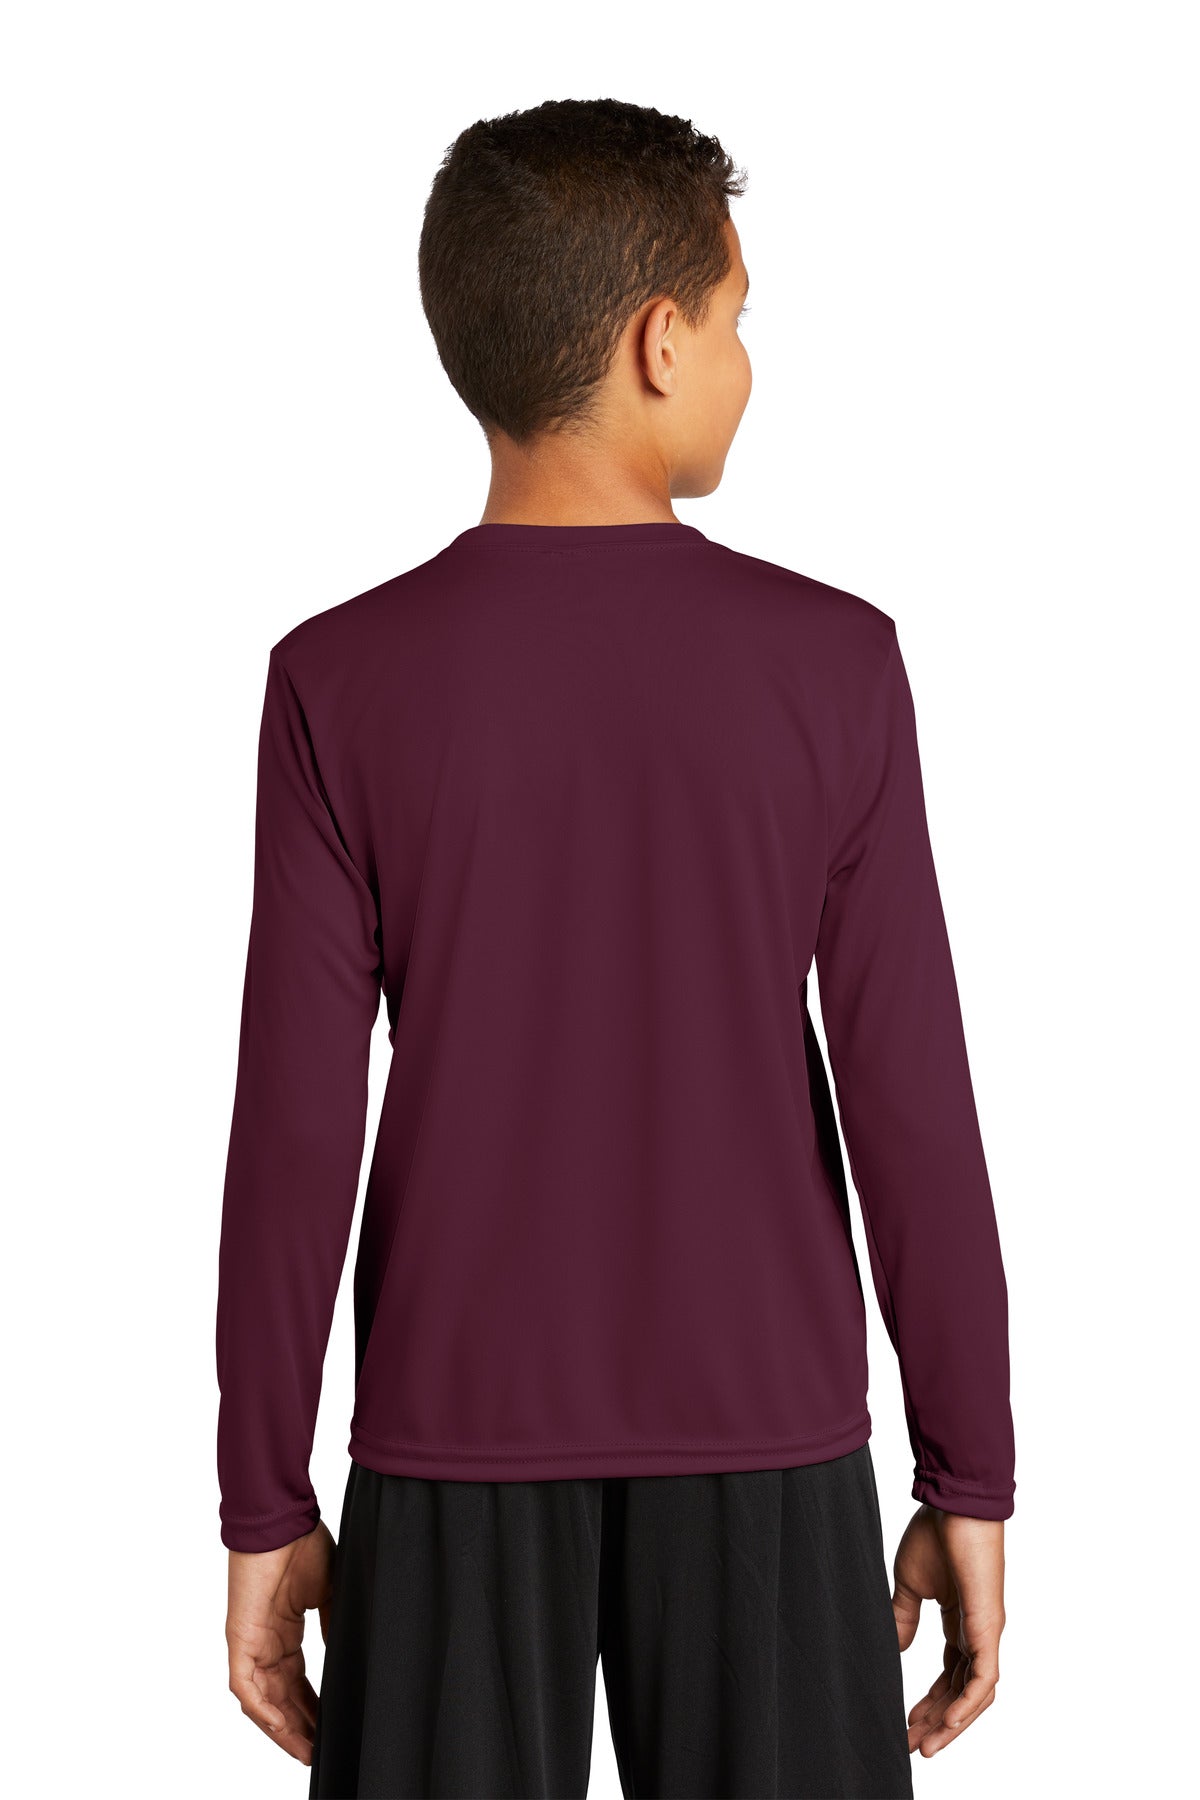 Sport-Tek® Youth Long Sleeve PosiCharge® Competitor™ Tee. YST350LS [Maroon] - DFW Impression